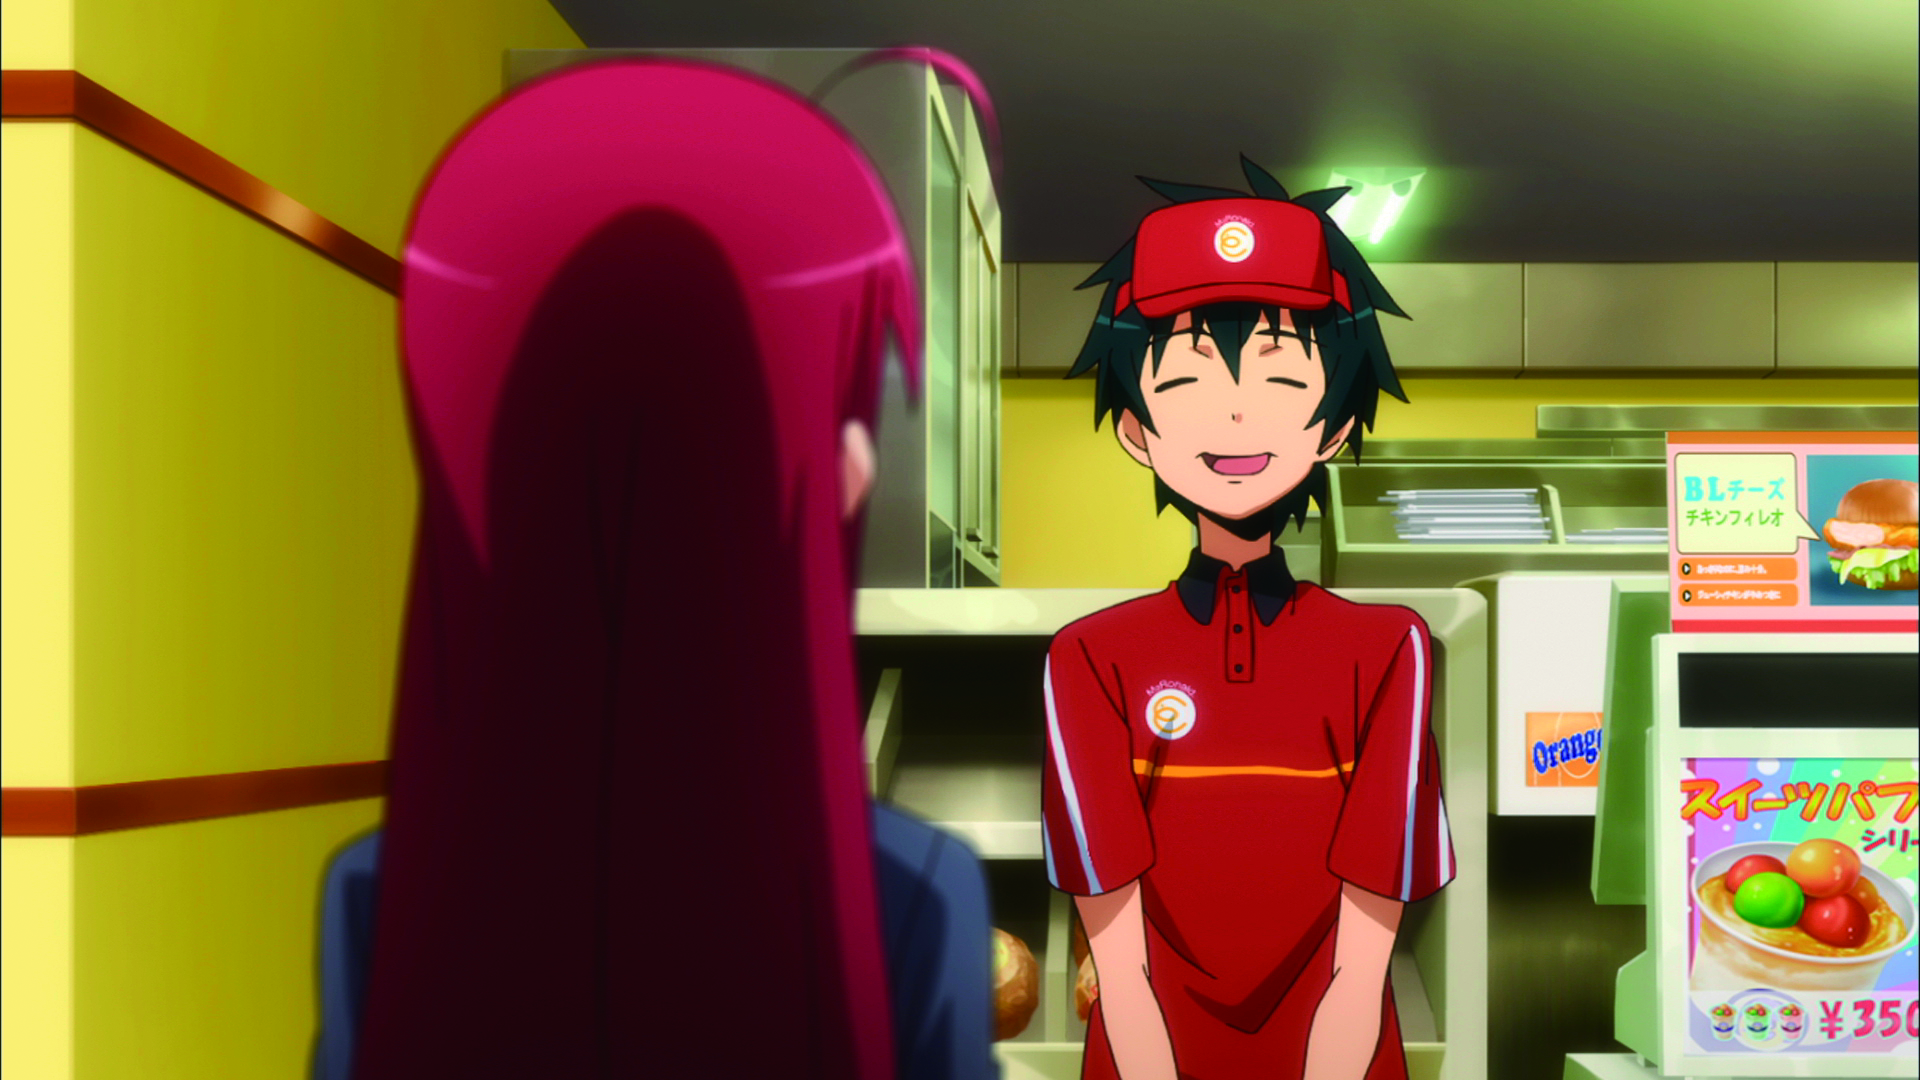 The Devil Is A Part-Timer! [English Sub] 